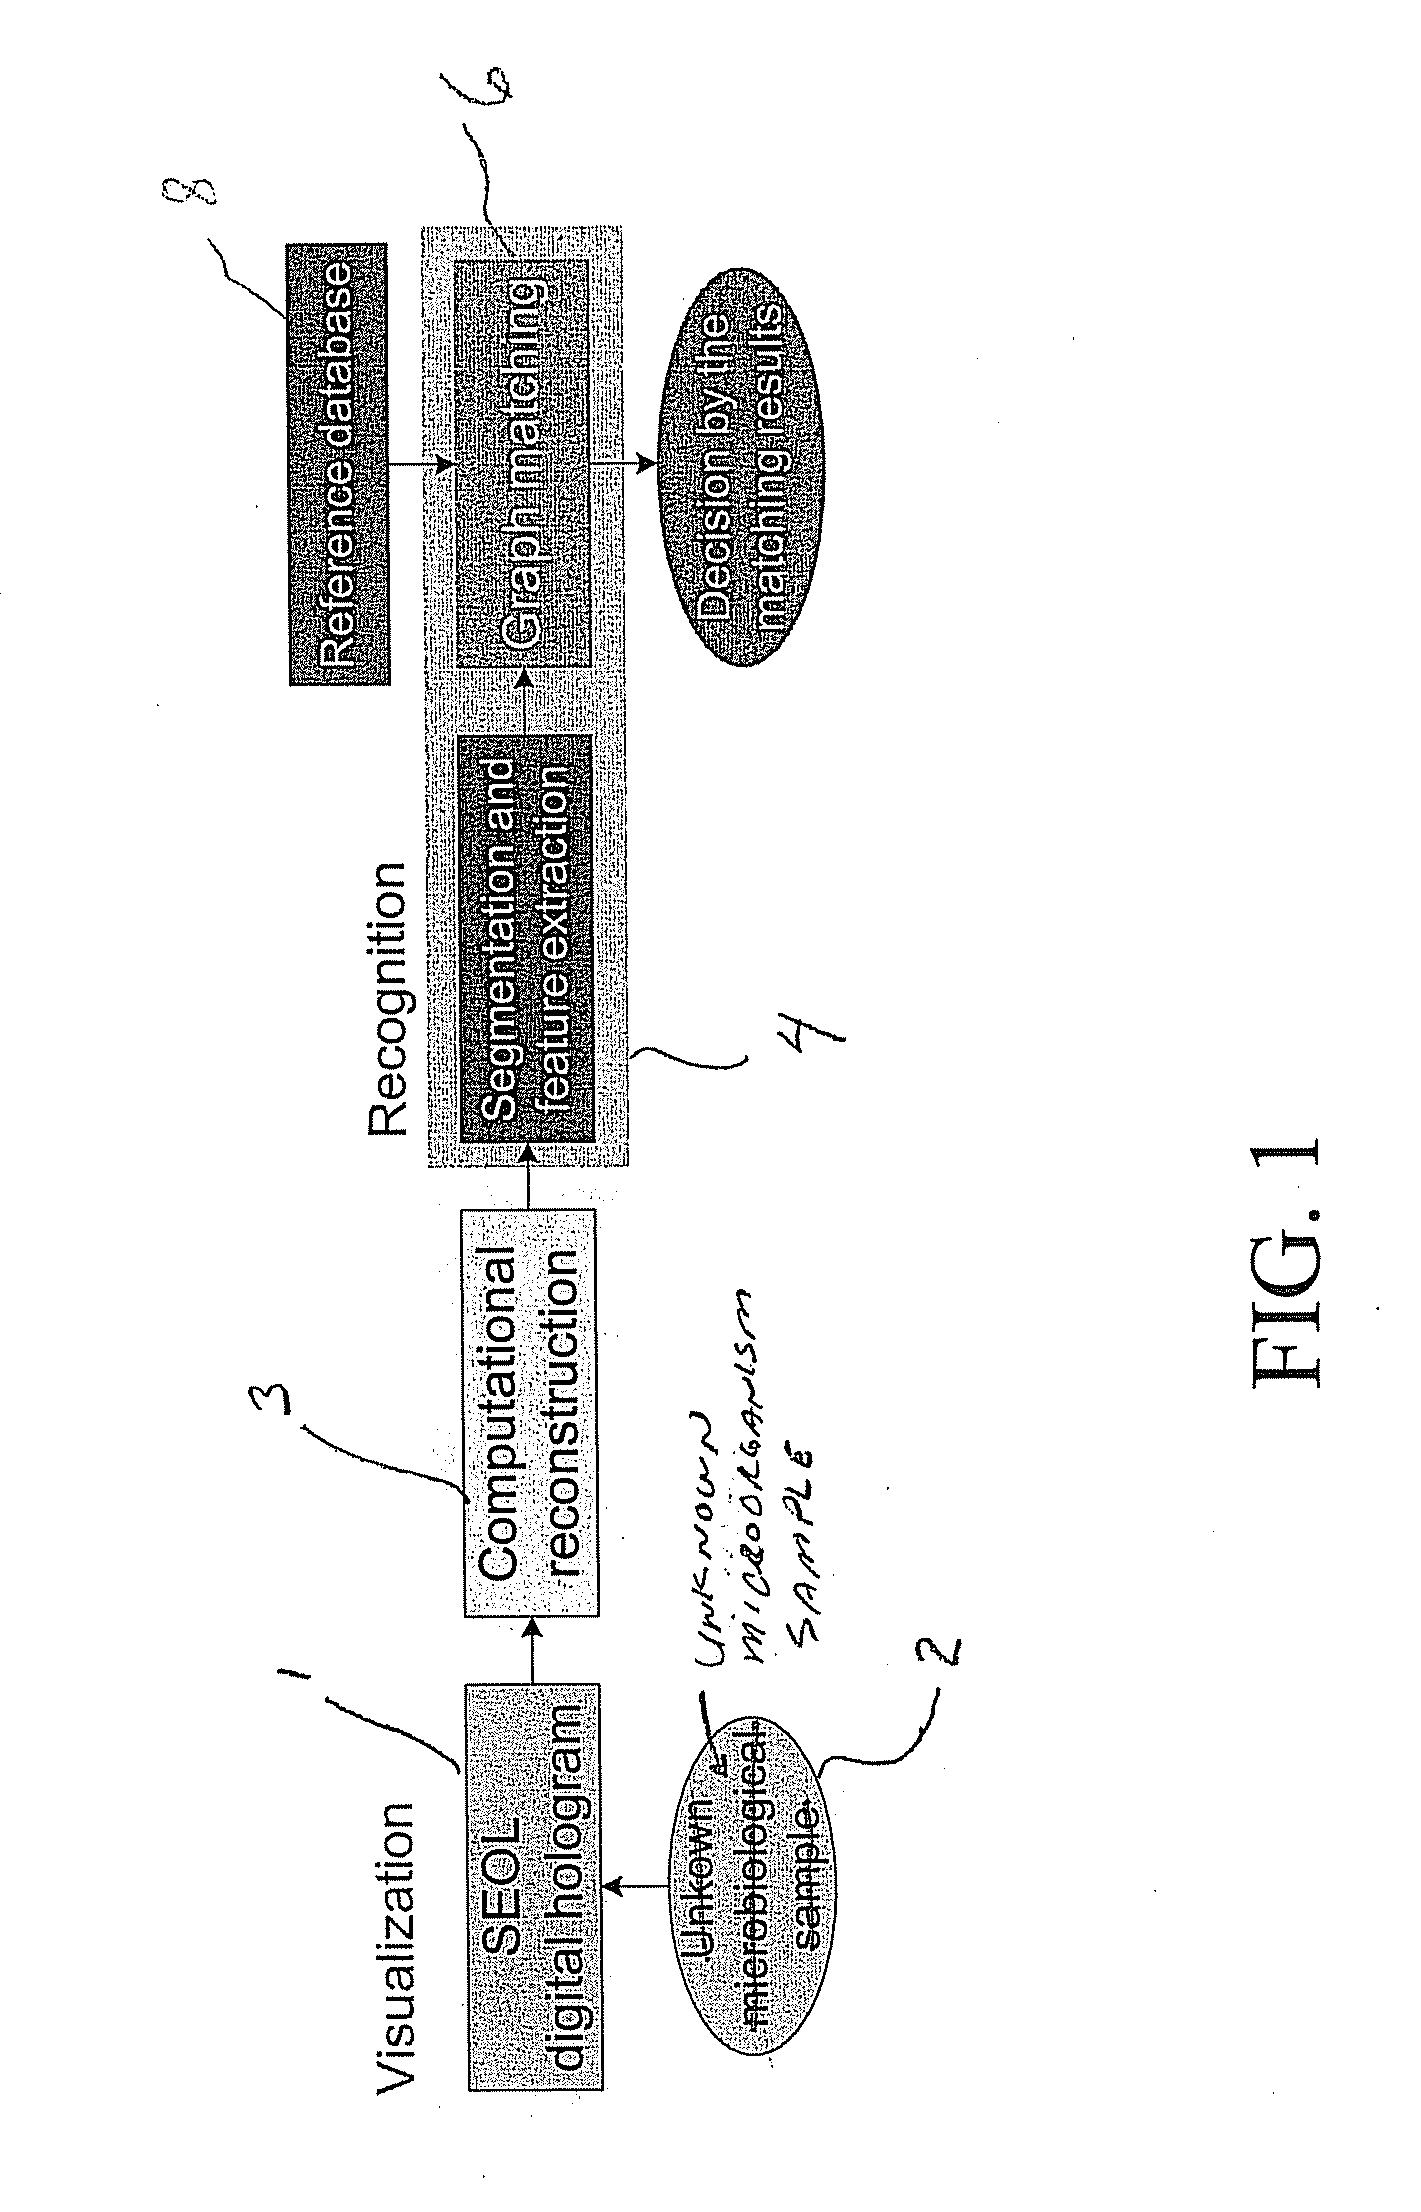 Method and apparatus for recognition of microorganisms using holographic microscopy